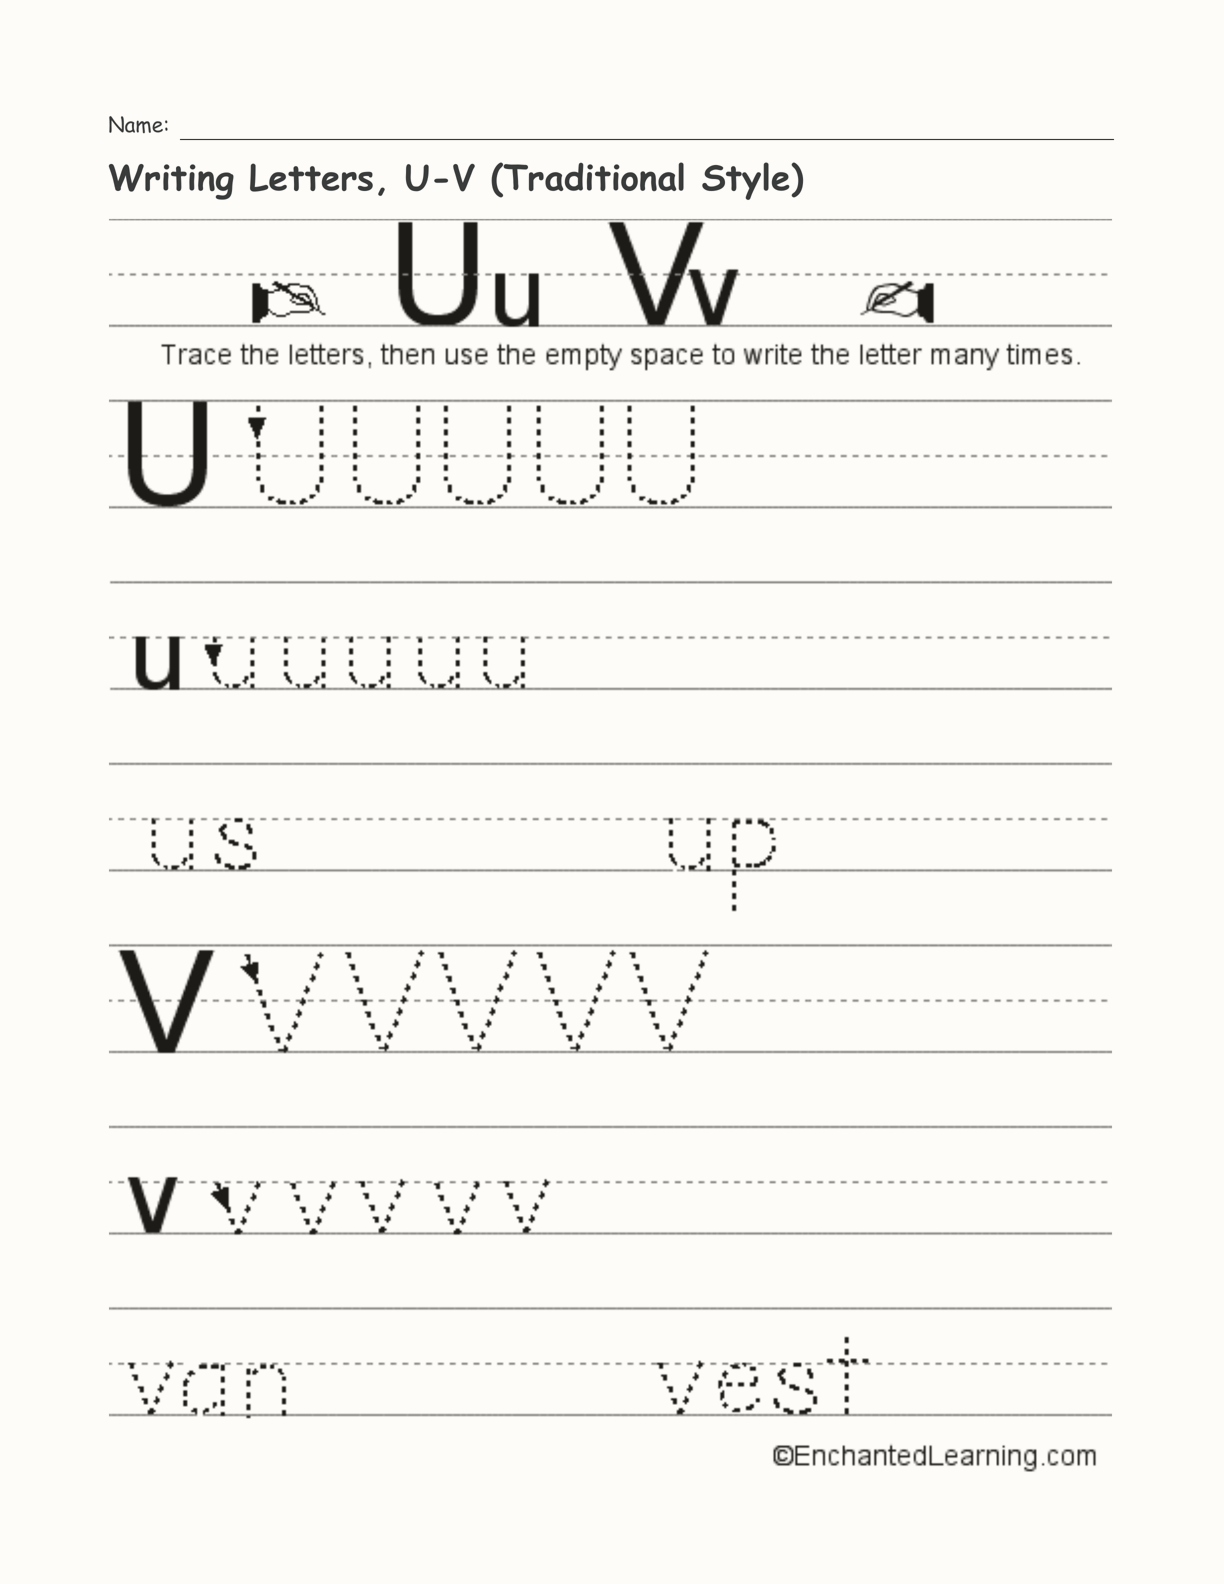 Writing Letters, U-V (Traditional Style) interactive worksheet page 1